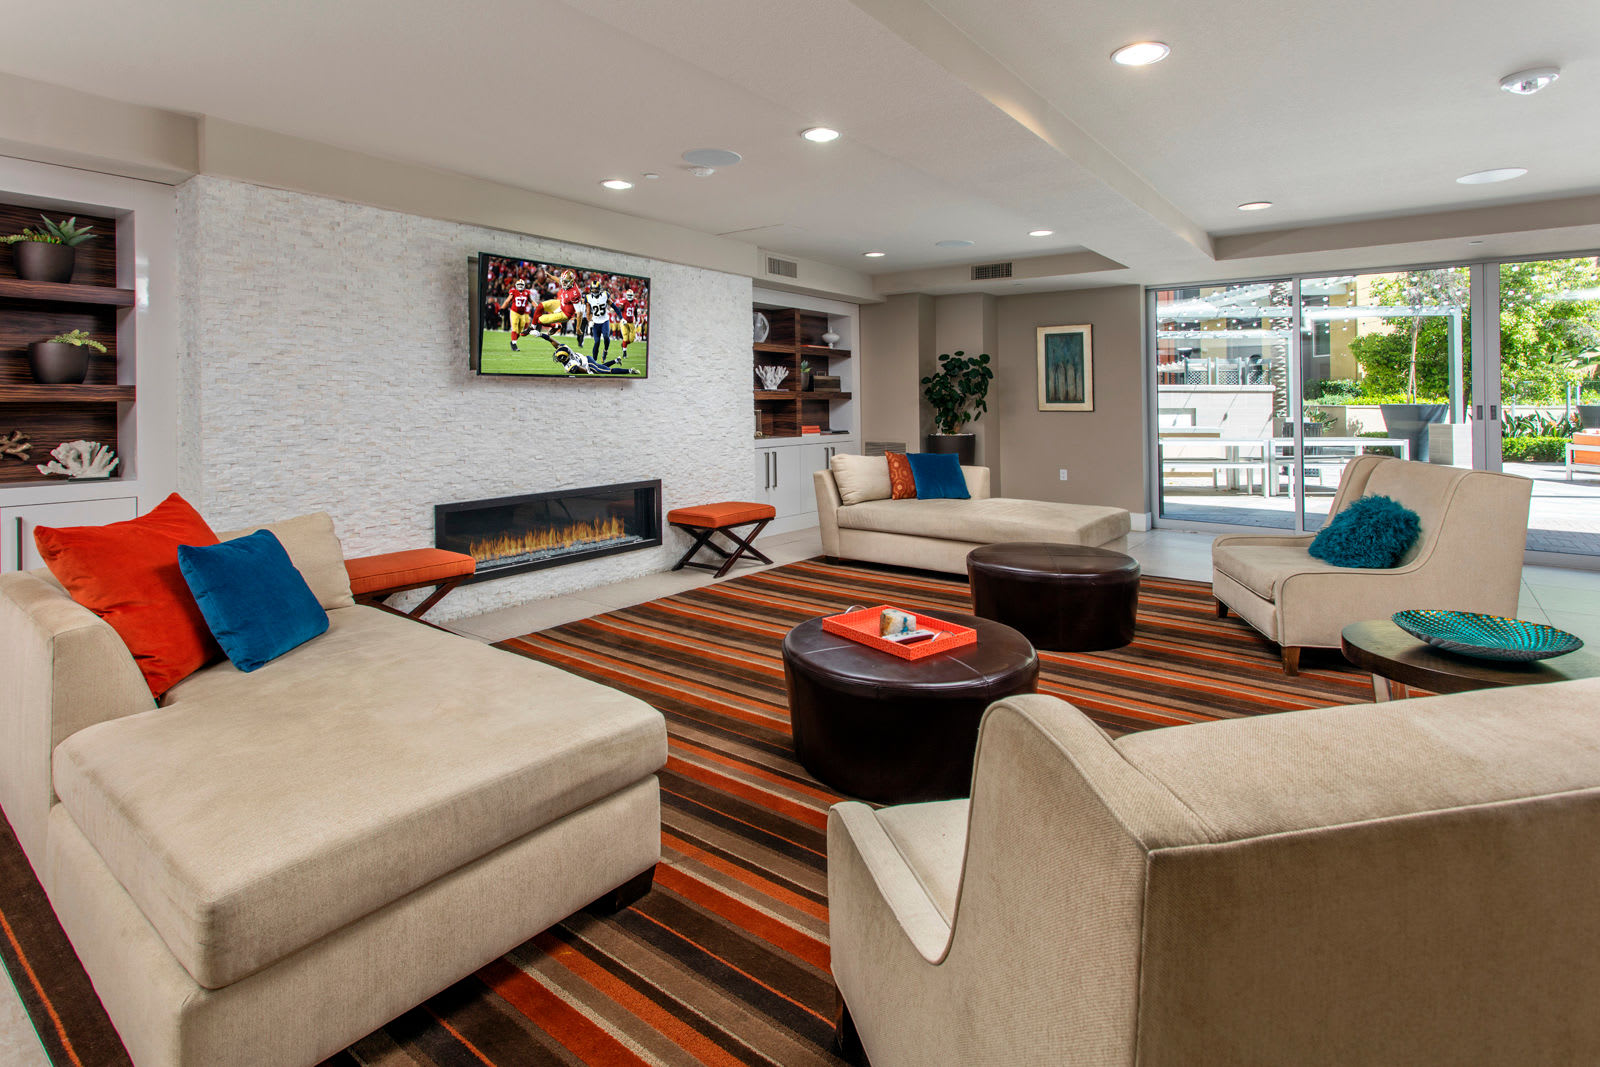 Common area at The Boulevard Apartment Homes in Woodland Hills, California